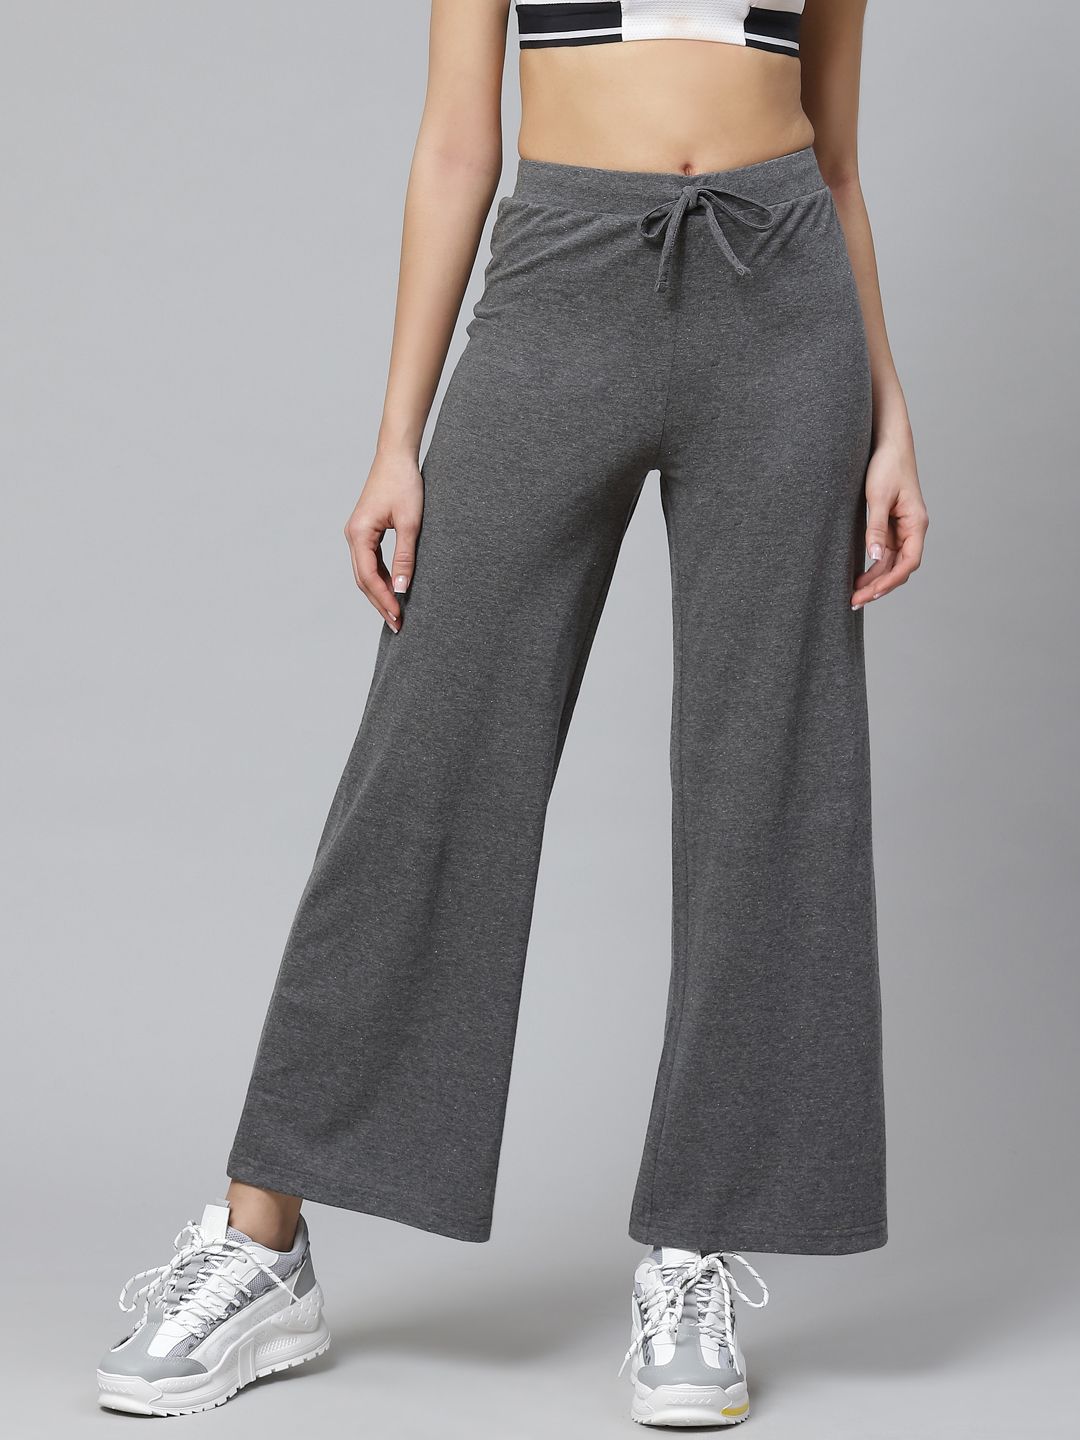 Hubberholme Women Charcoal Grey Solid Track Pants Price in India